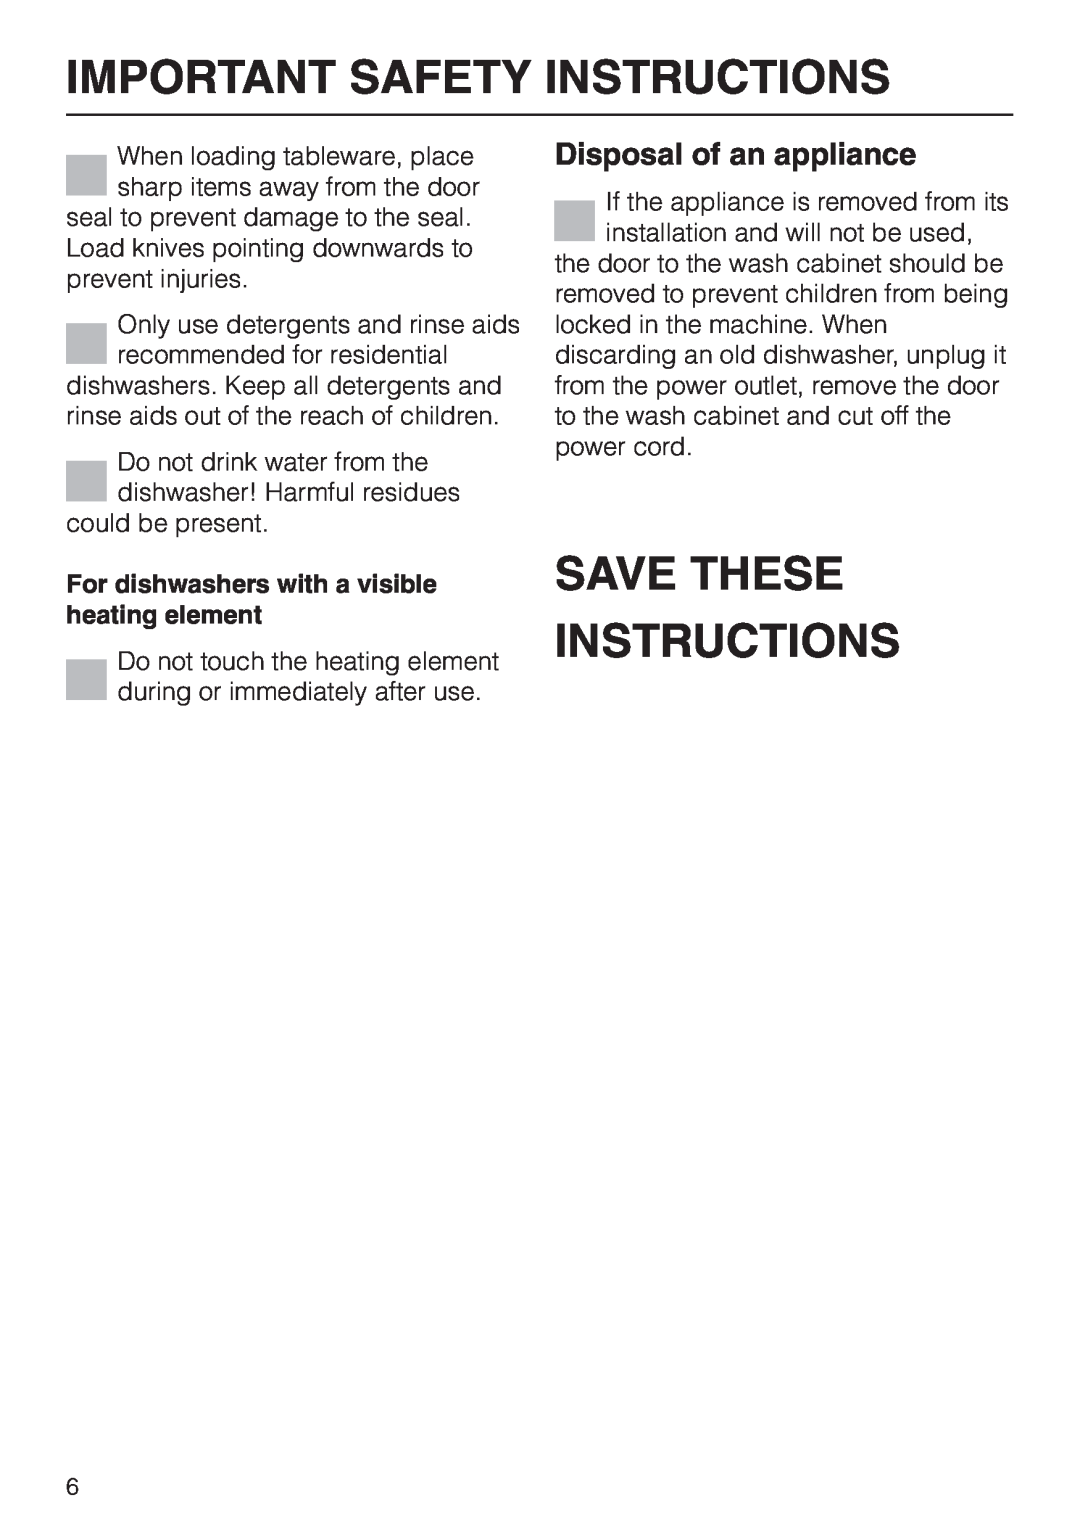 Miele G892us, G 892 SC manual Save These Instructions, Disposal of an appliance, Important Safety Instructions 